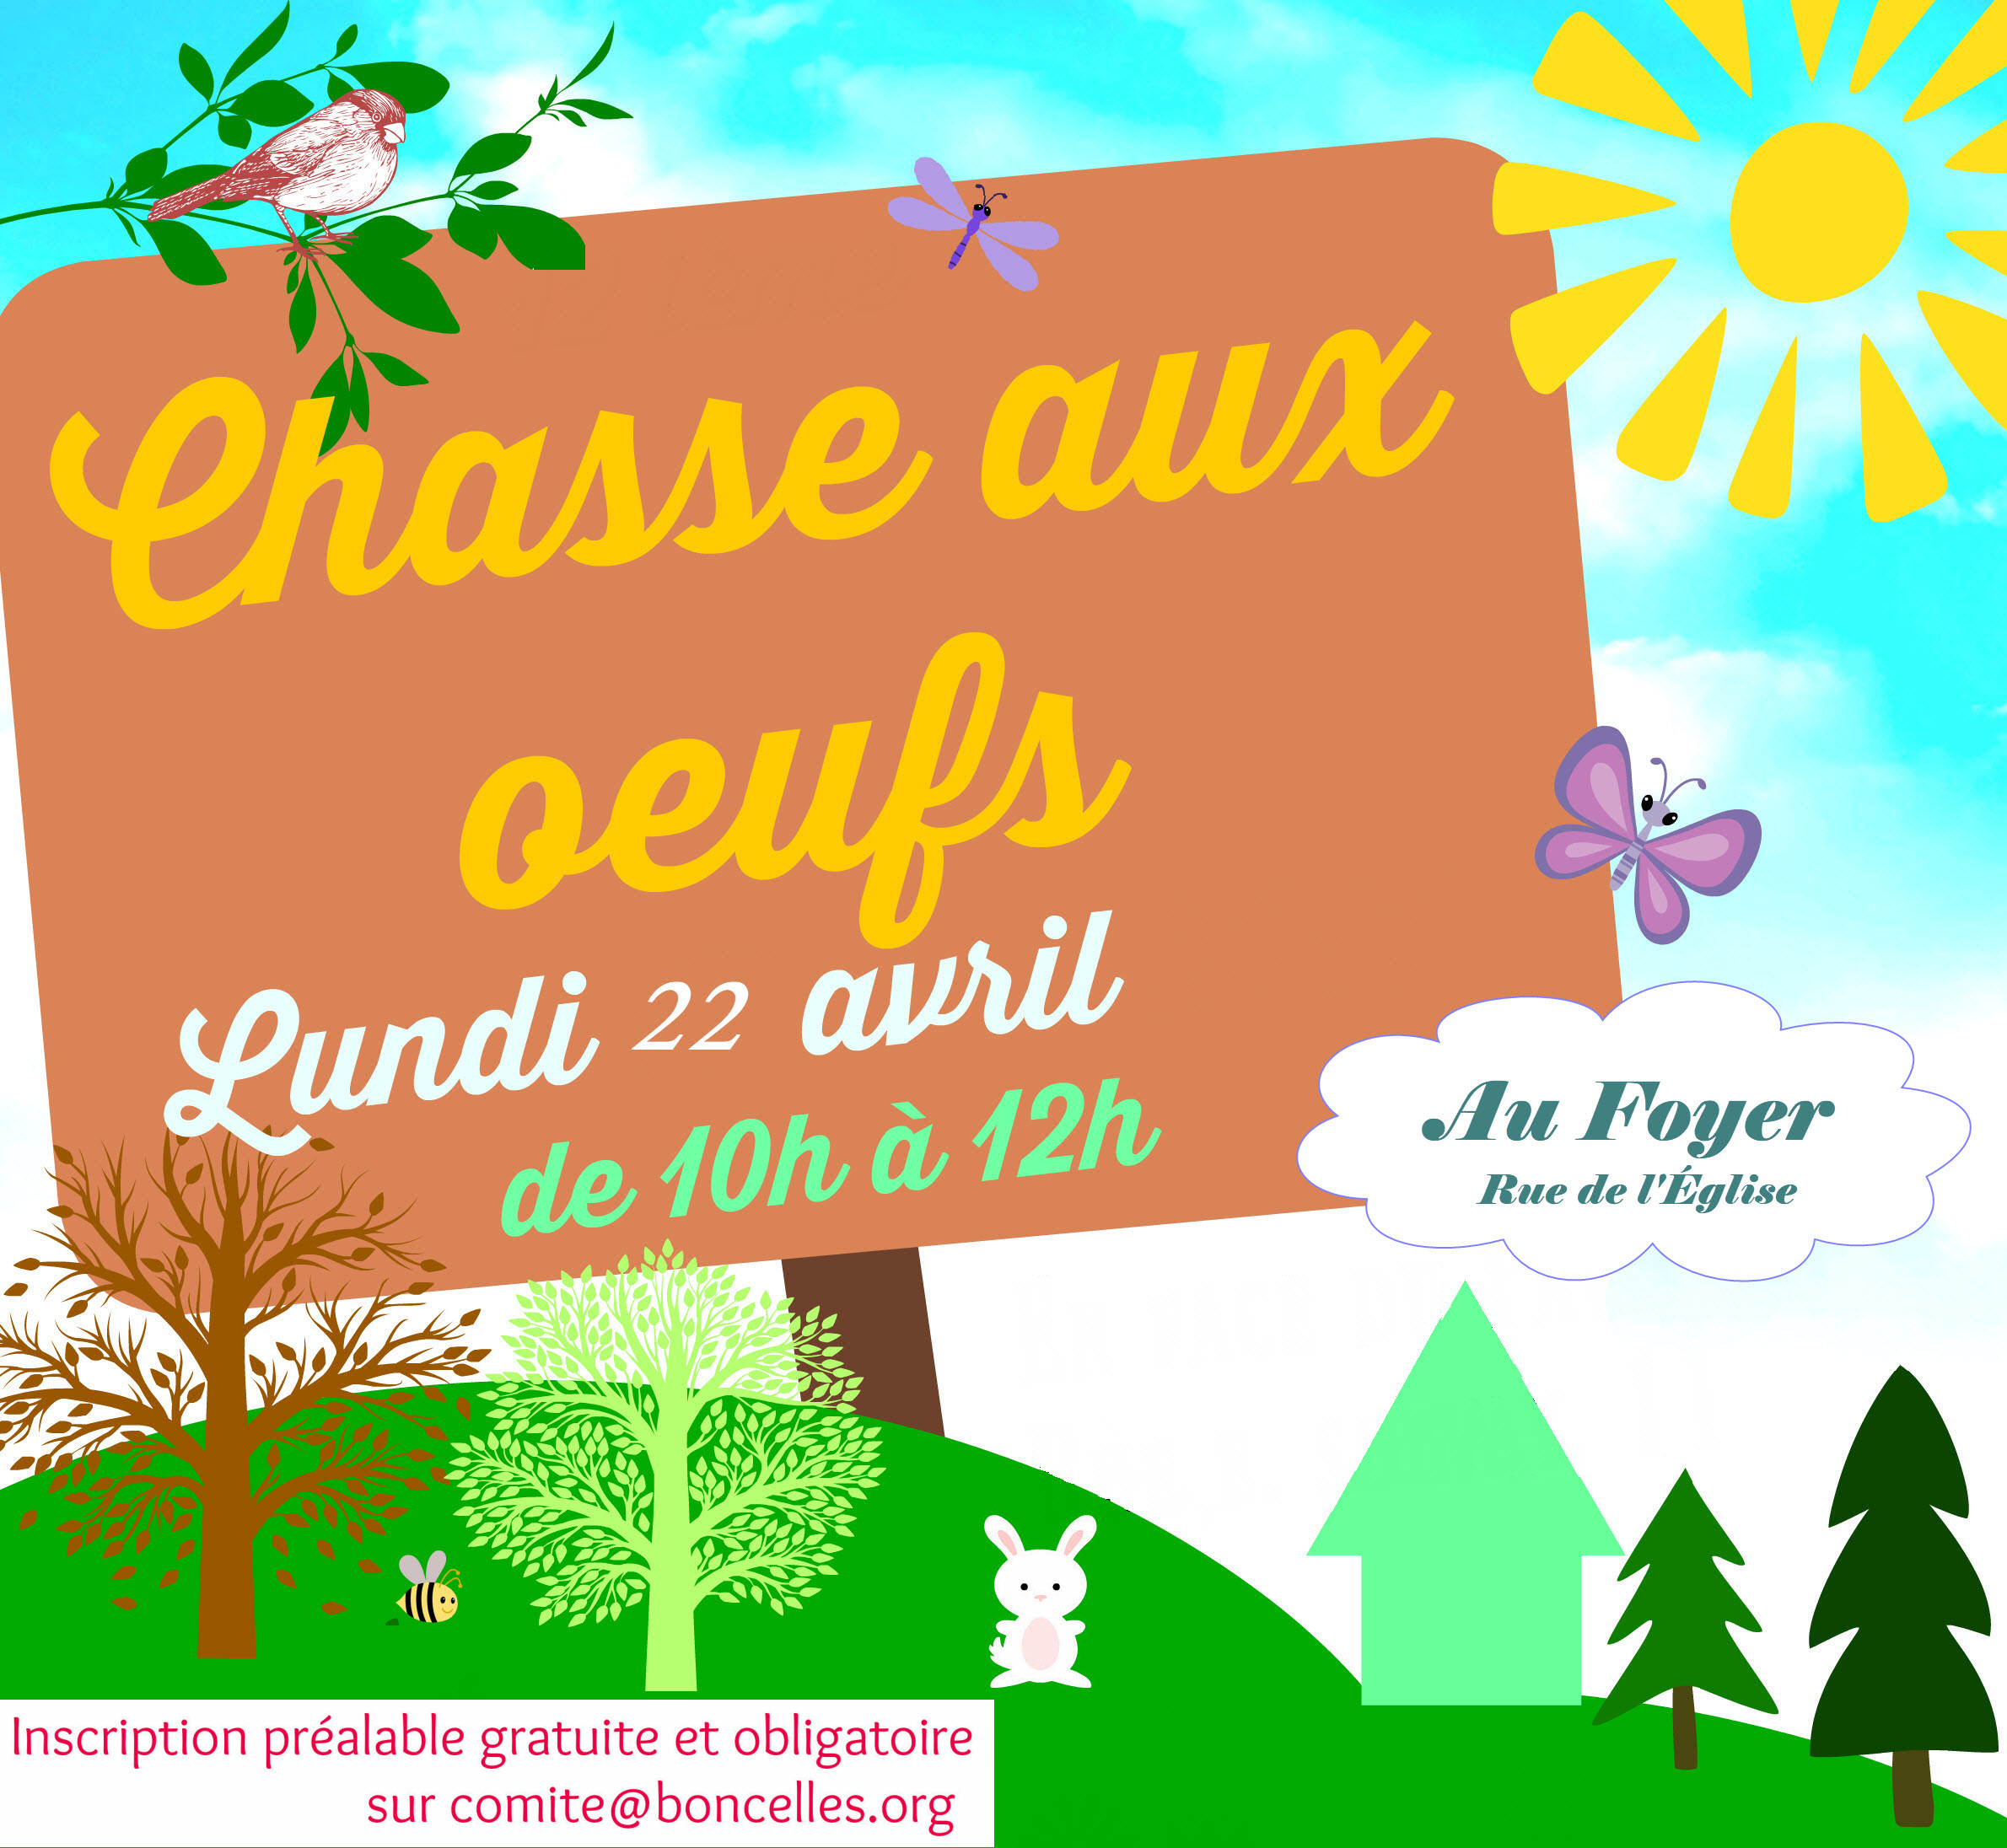 Chasse aux oeufs 2019